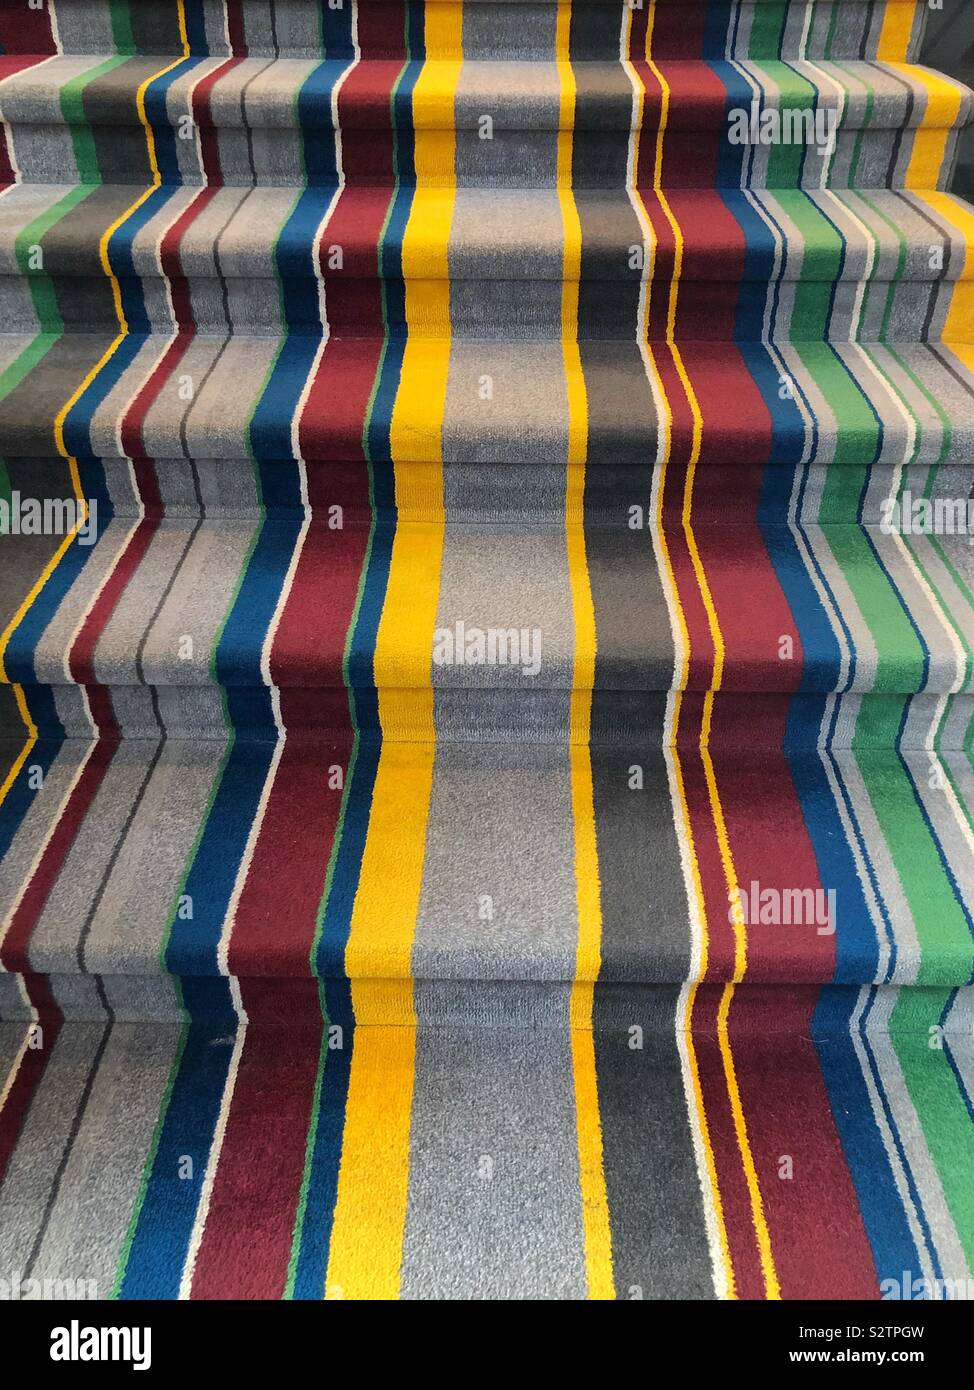 A stairway covered in a colorful striped carpet Stock Photo